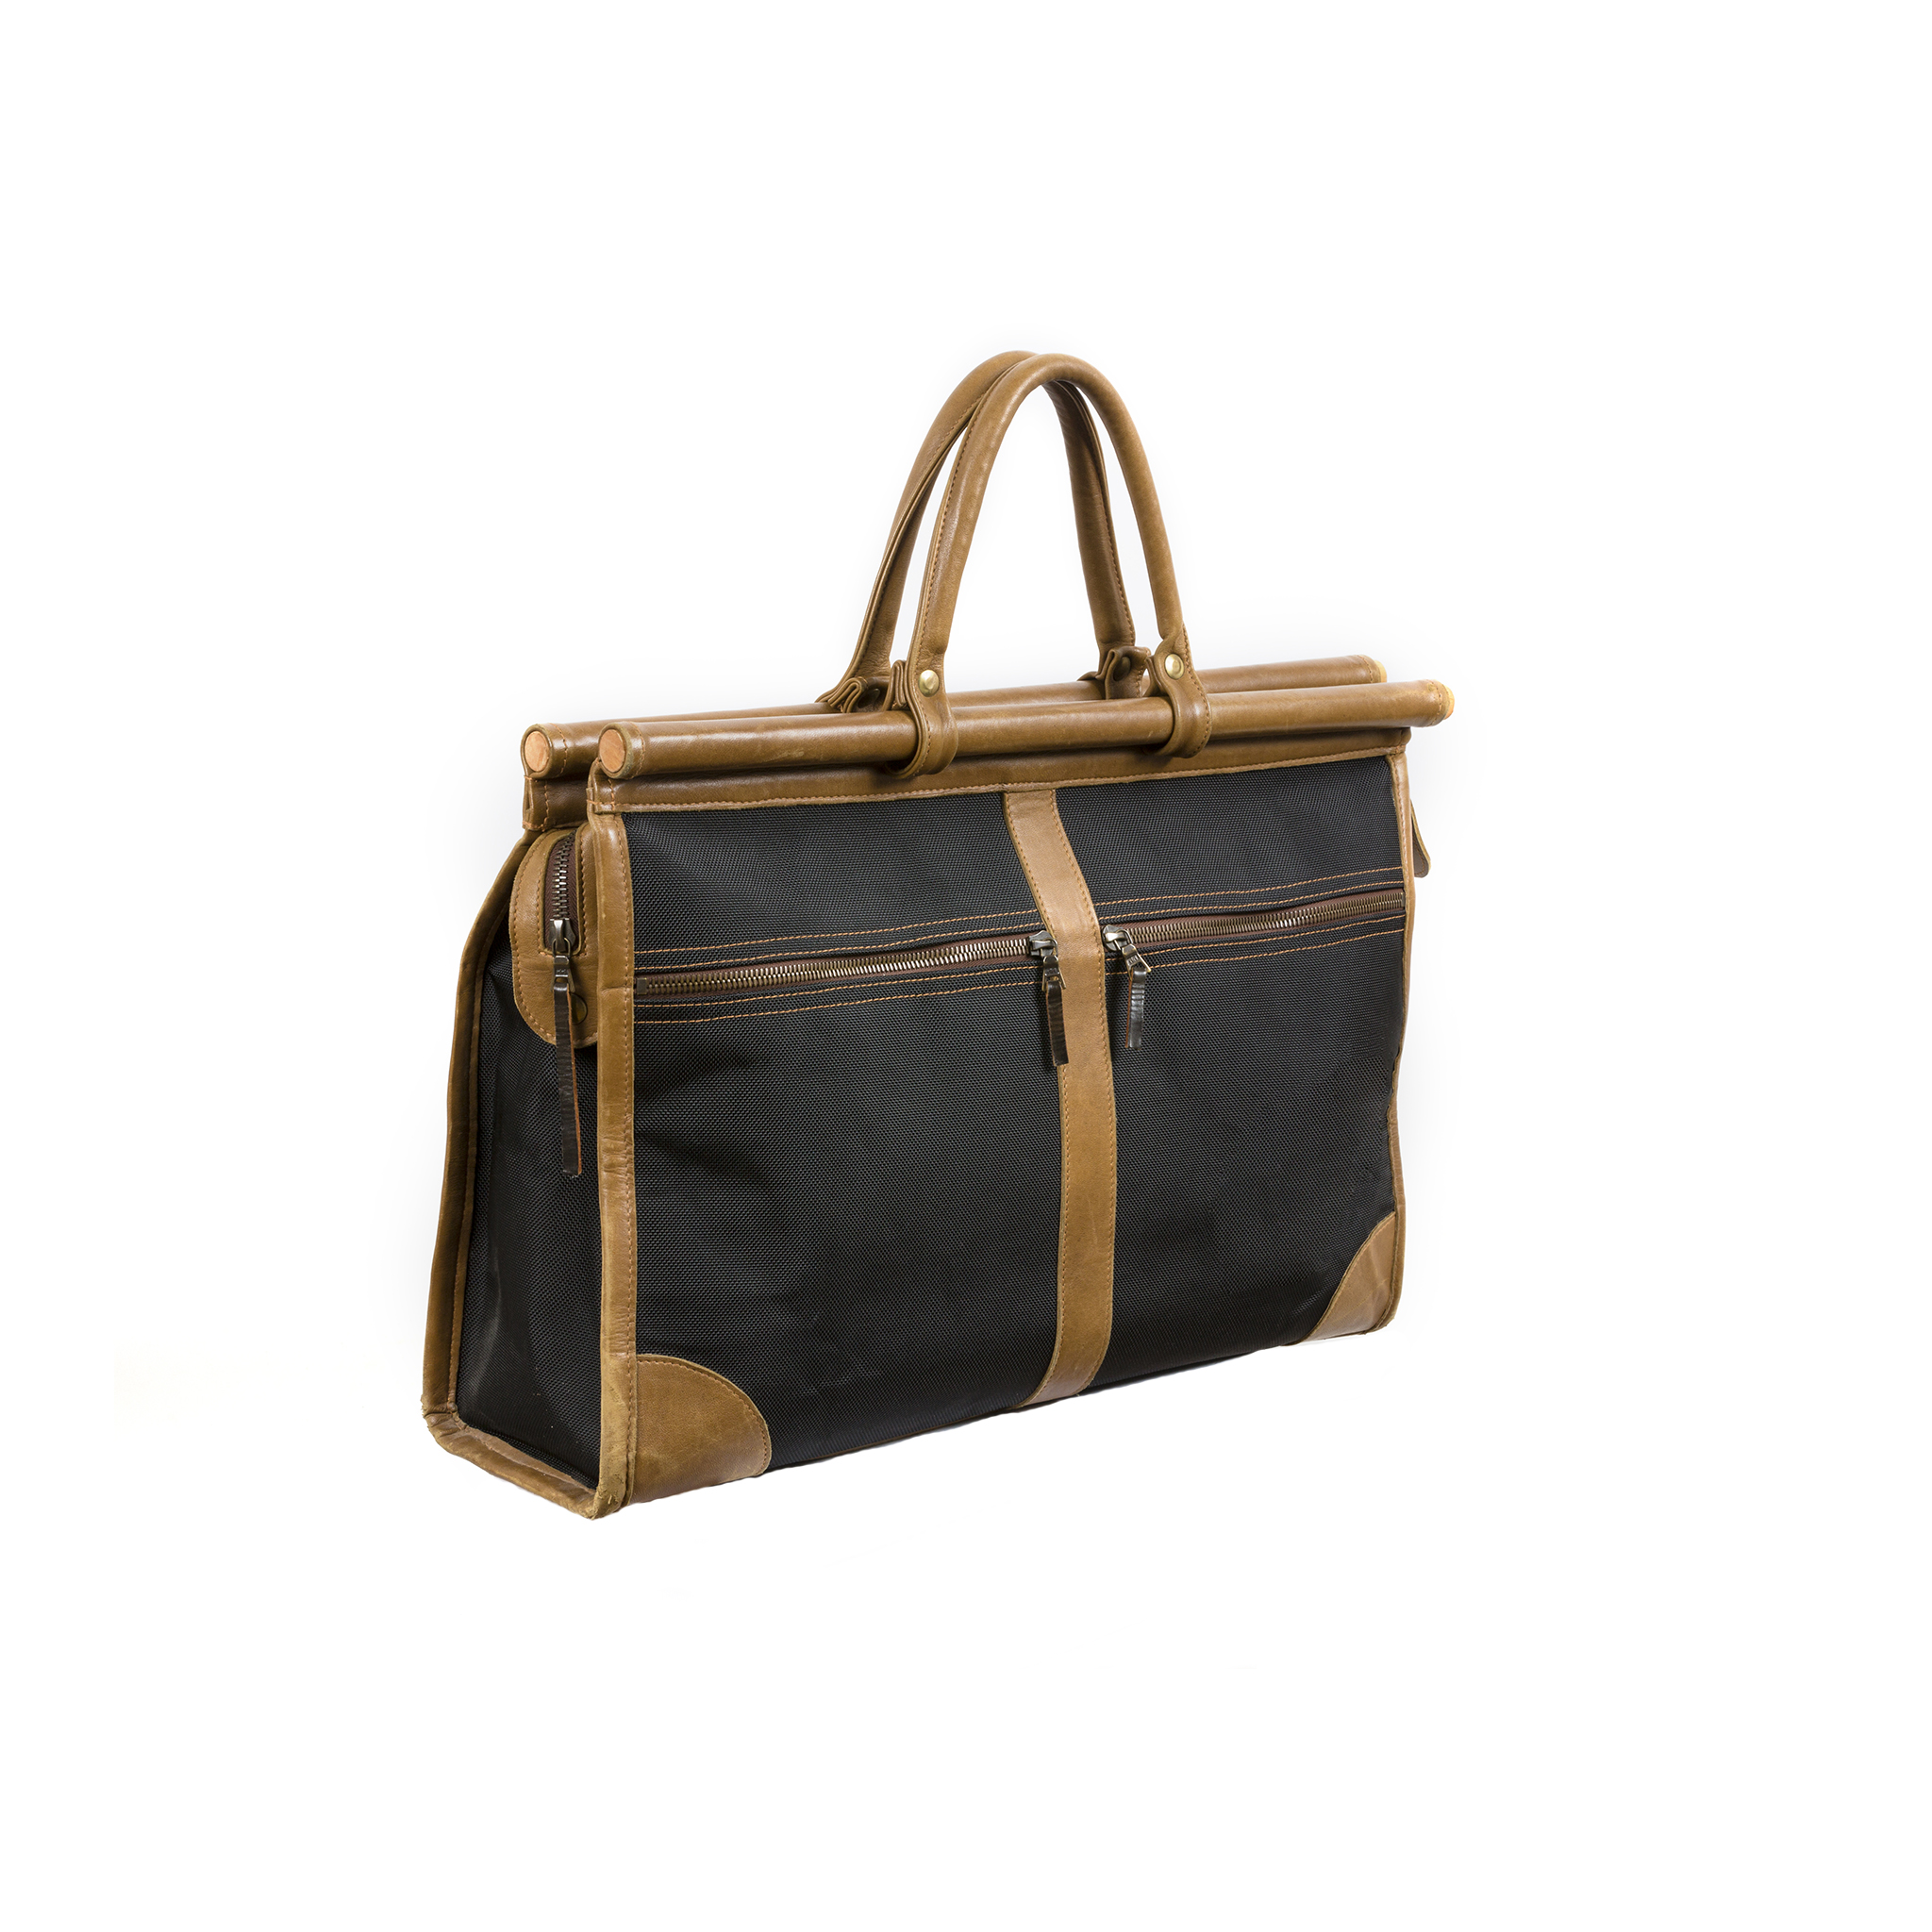 Hunting Bag - Carbone fabric and glossy leather